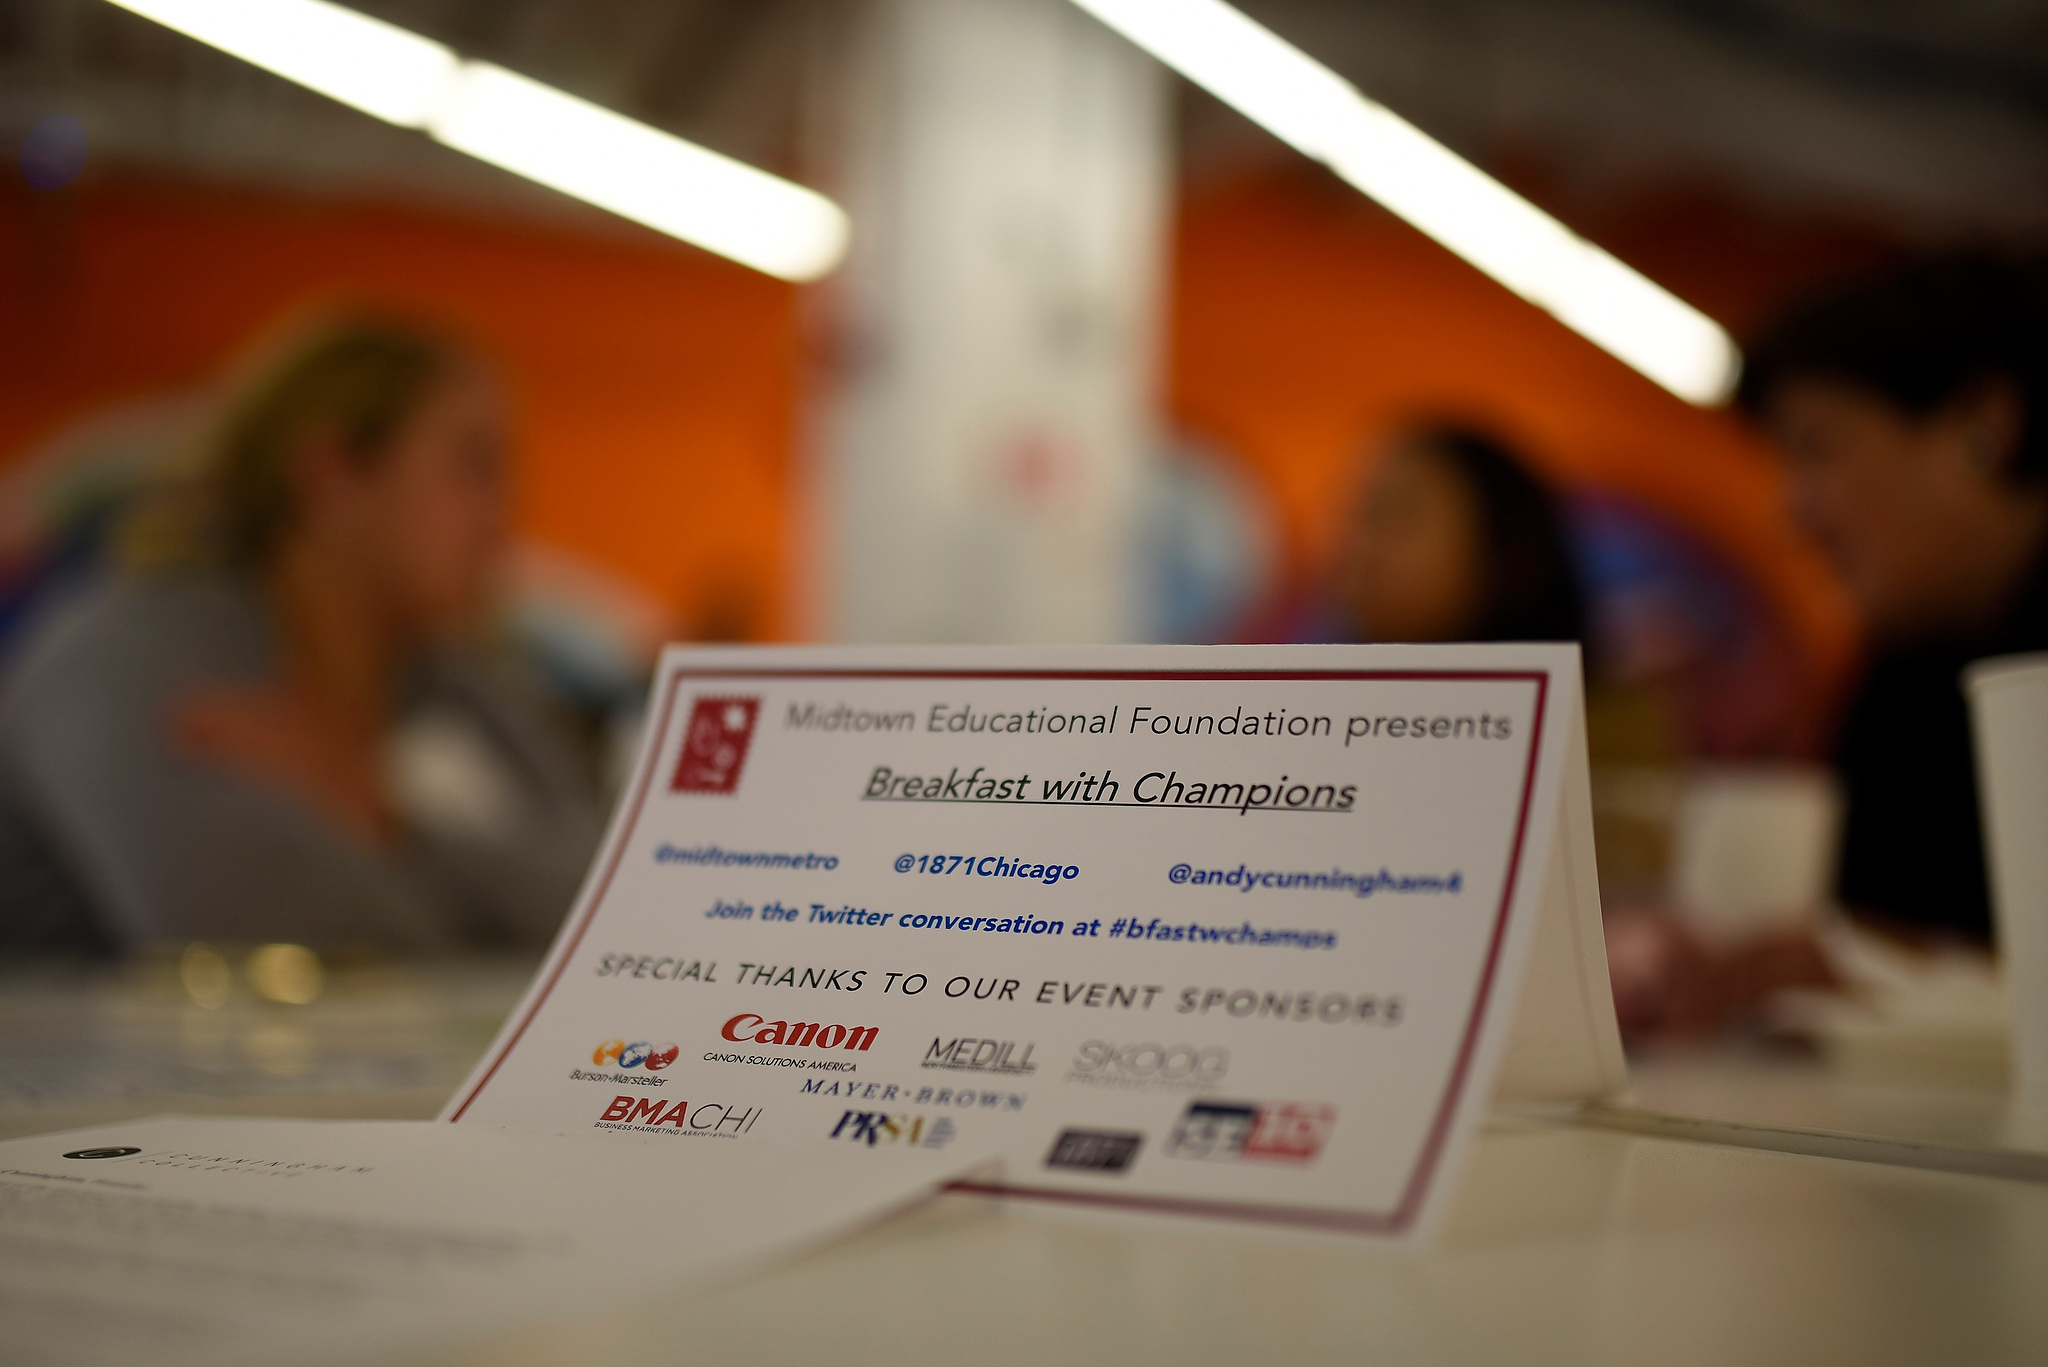 20160407-_SSV9688.NEF-HAT Tour with Andrea Cunningham and Midtown Education Foundation Breakfast with Champions-Photos-by-CloudSpotter.jpg